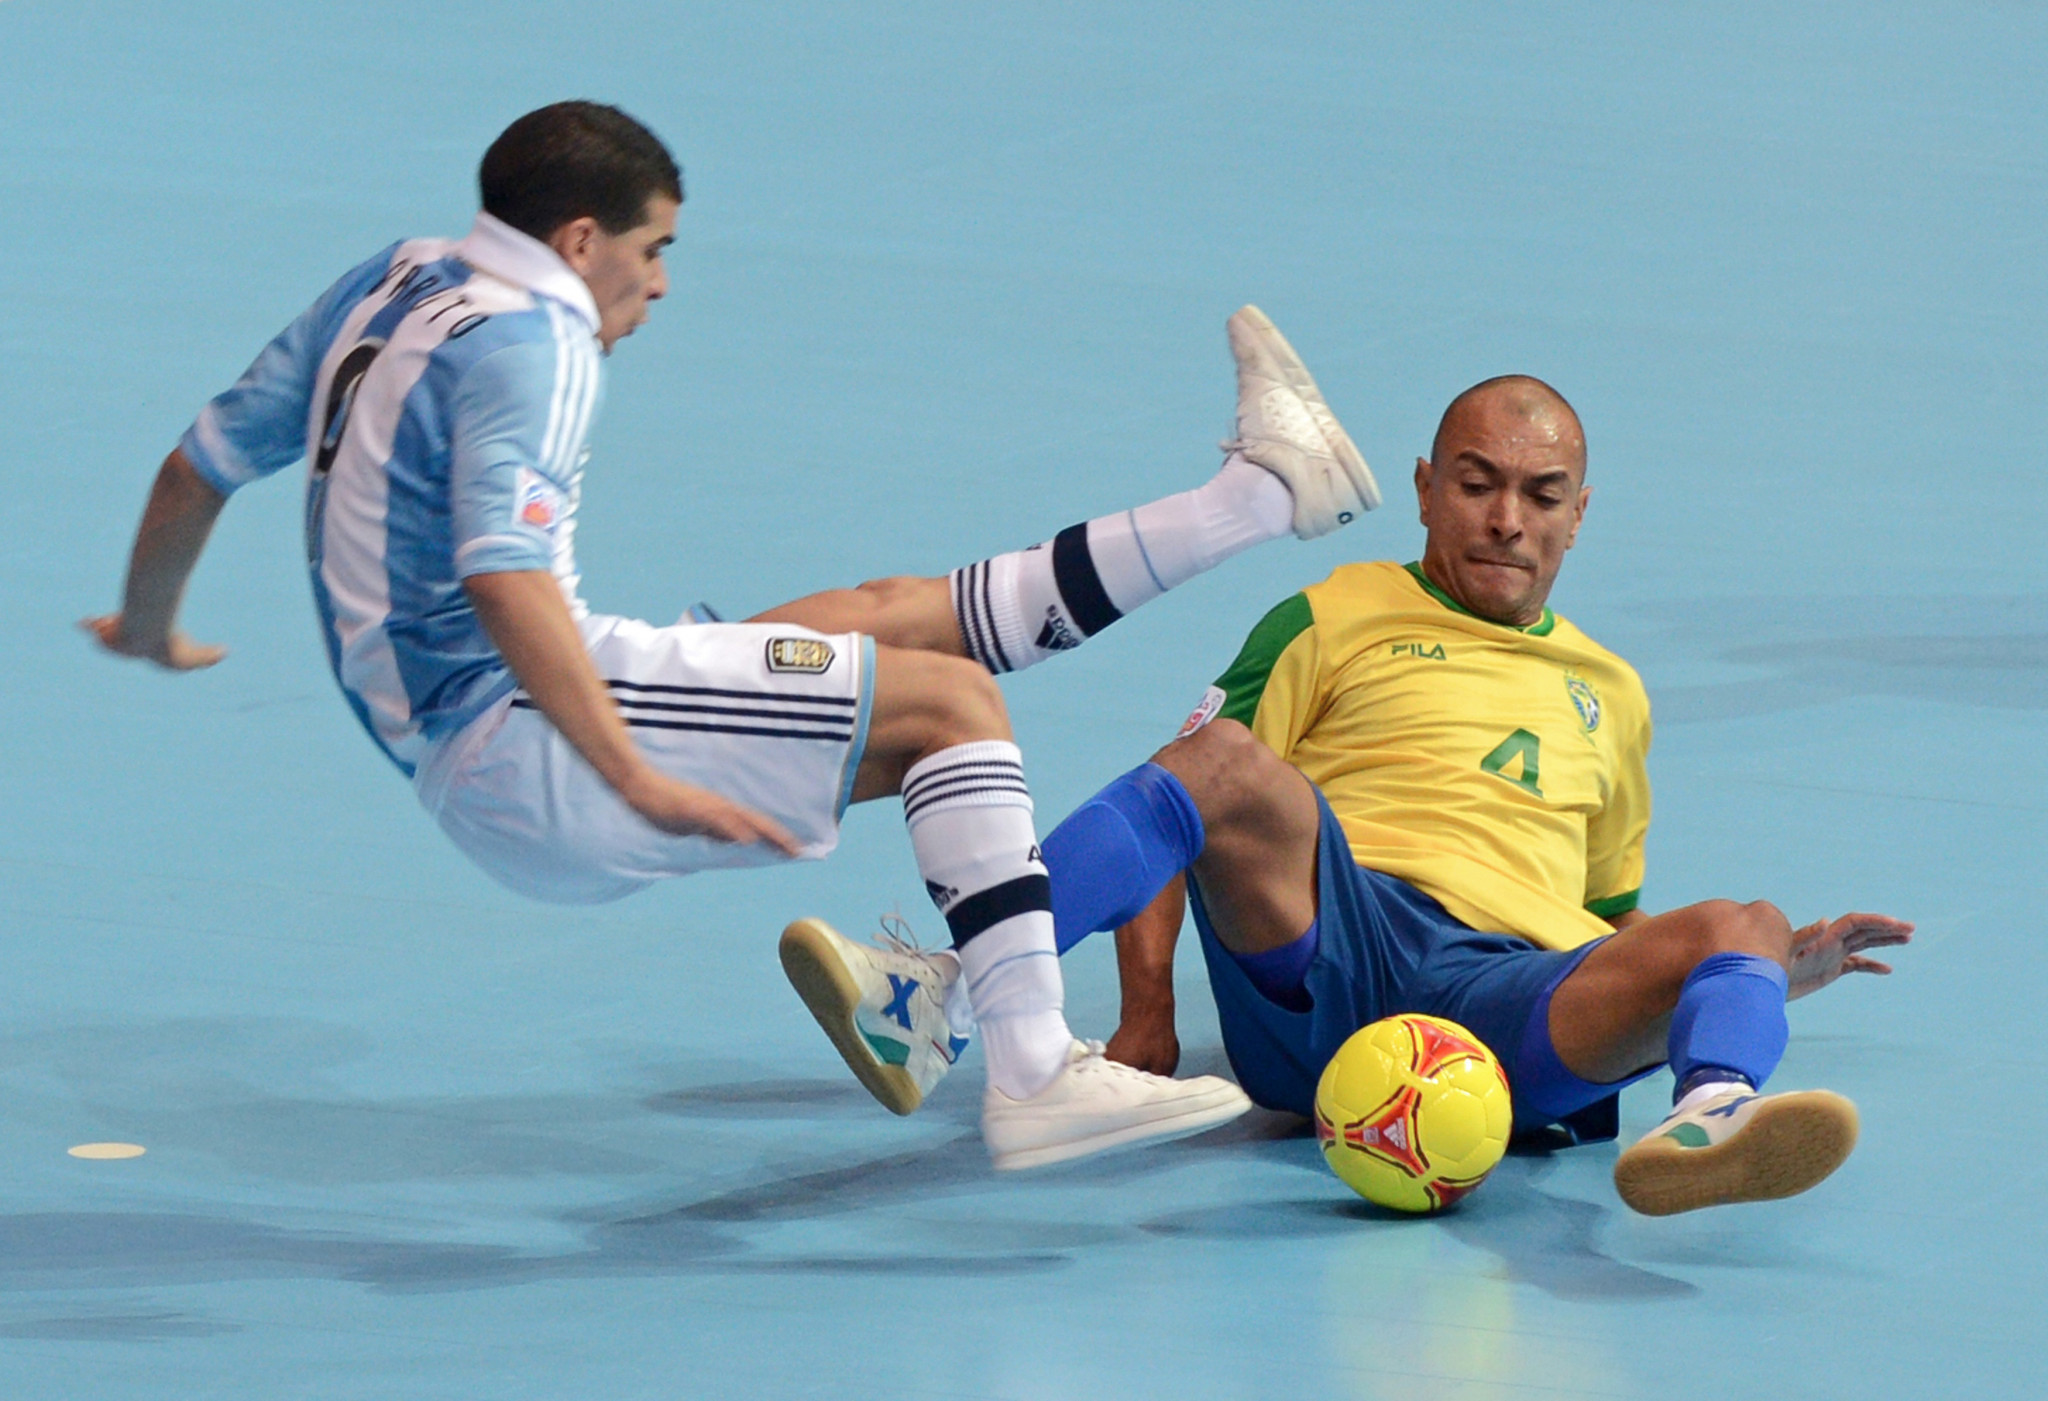 Brazil and Argentina have dominated the Copa América de Futsal, winning 10 and two of the 12 editions, respectively ©Getty Images